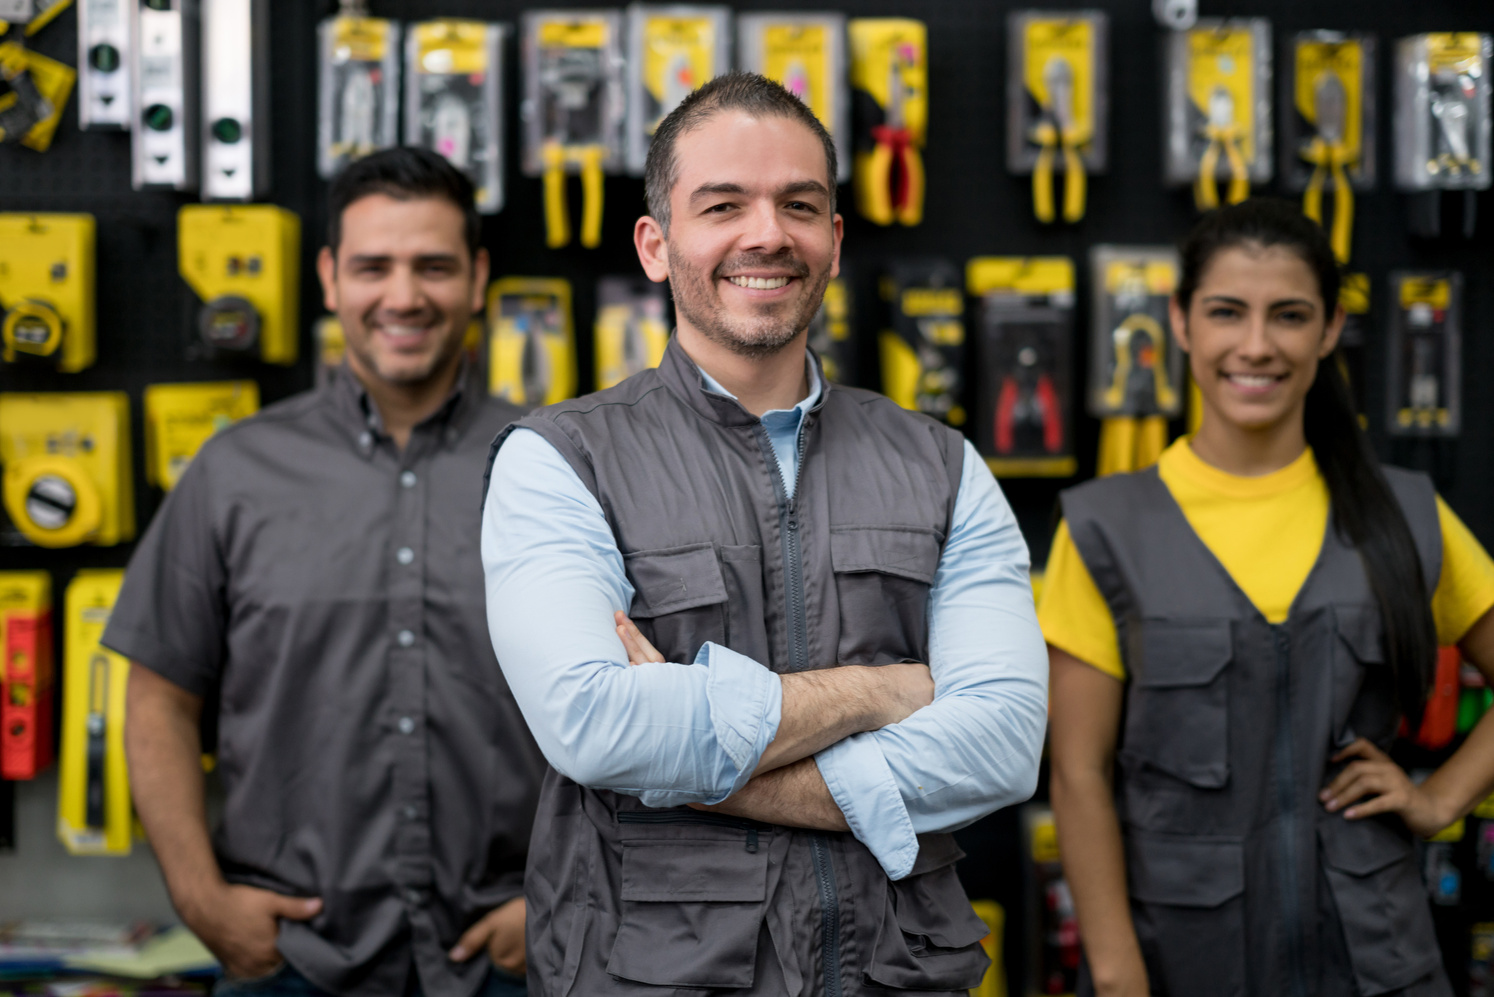 Staff working at a hardware store selling tools